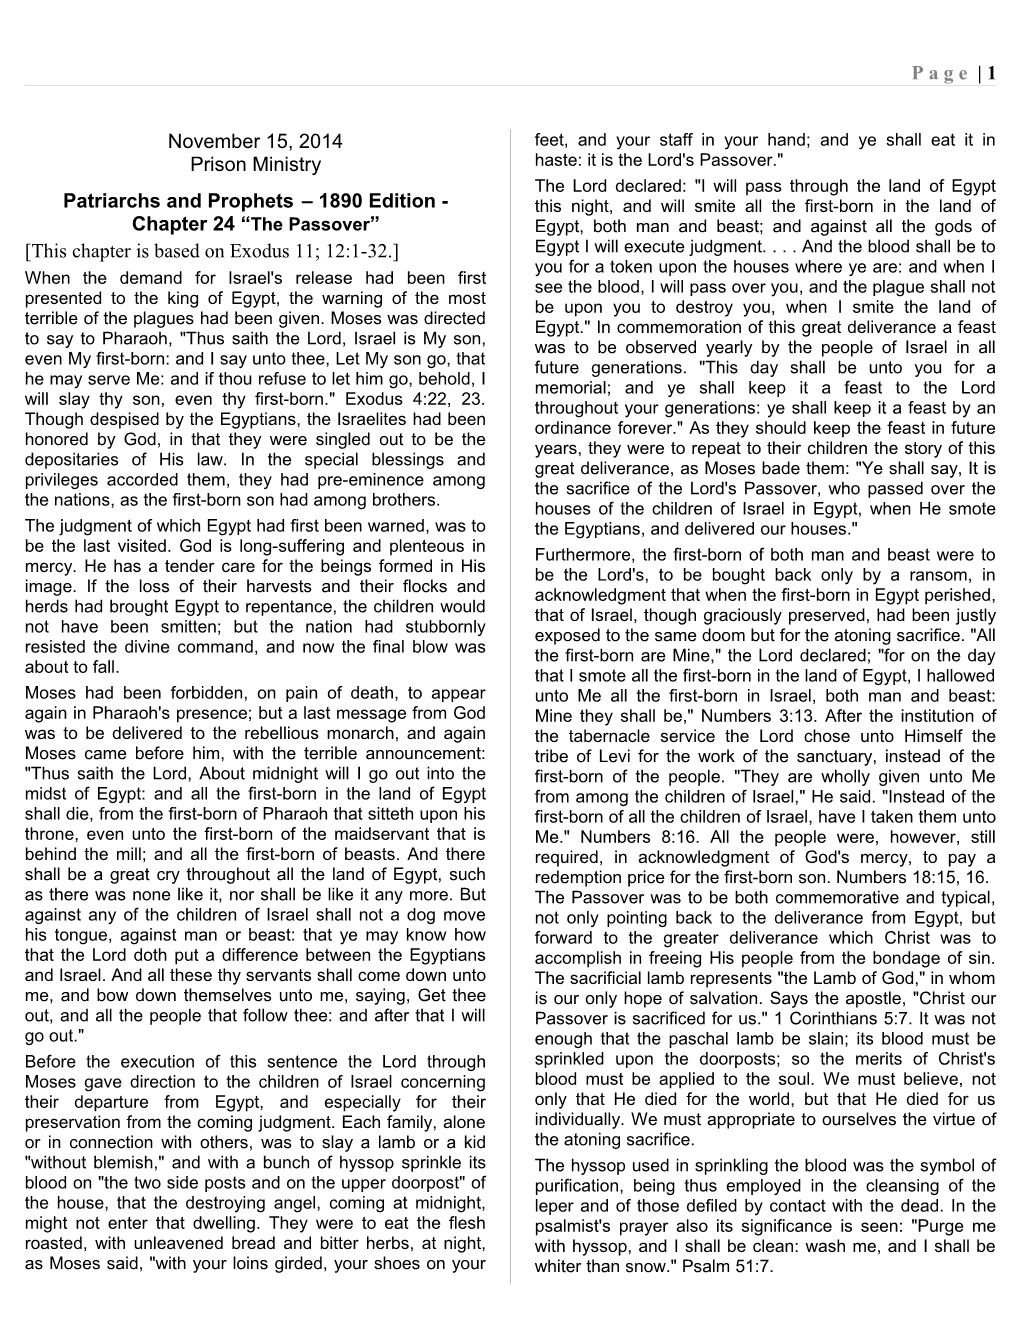 Patriarchs and Prophets 1890 Edition - Chapter 24 the Passover